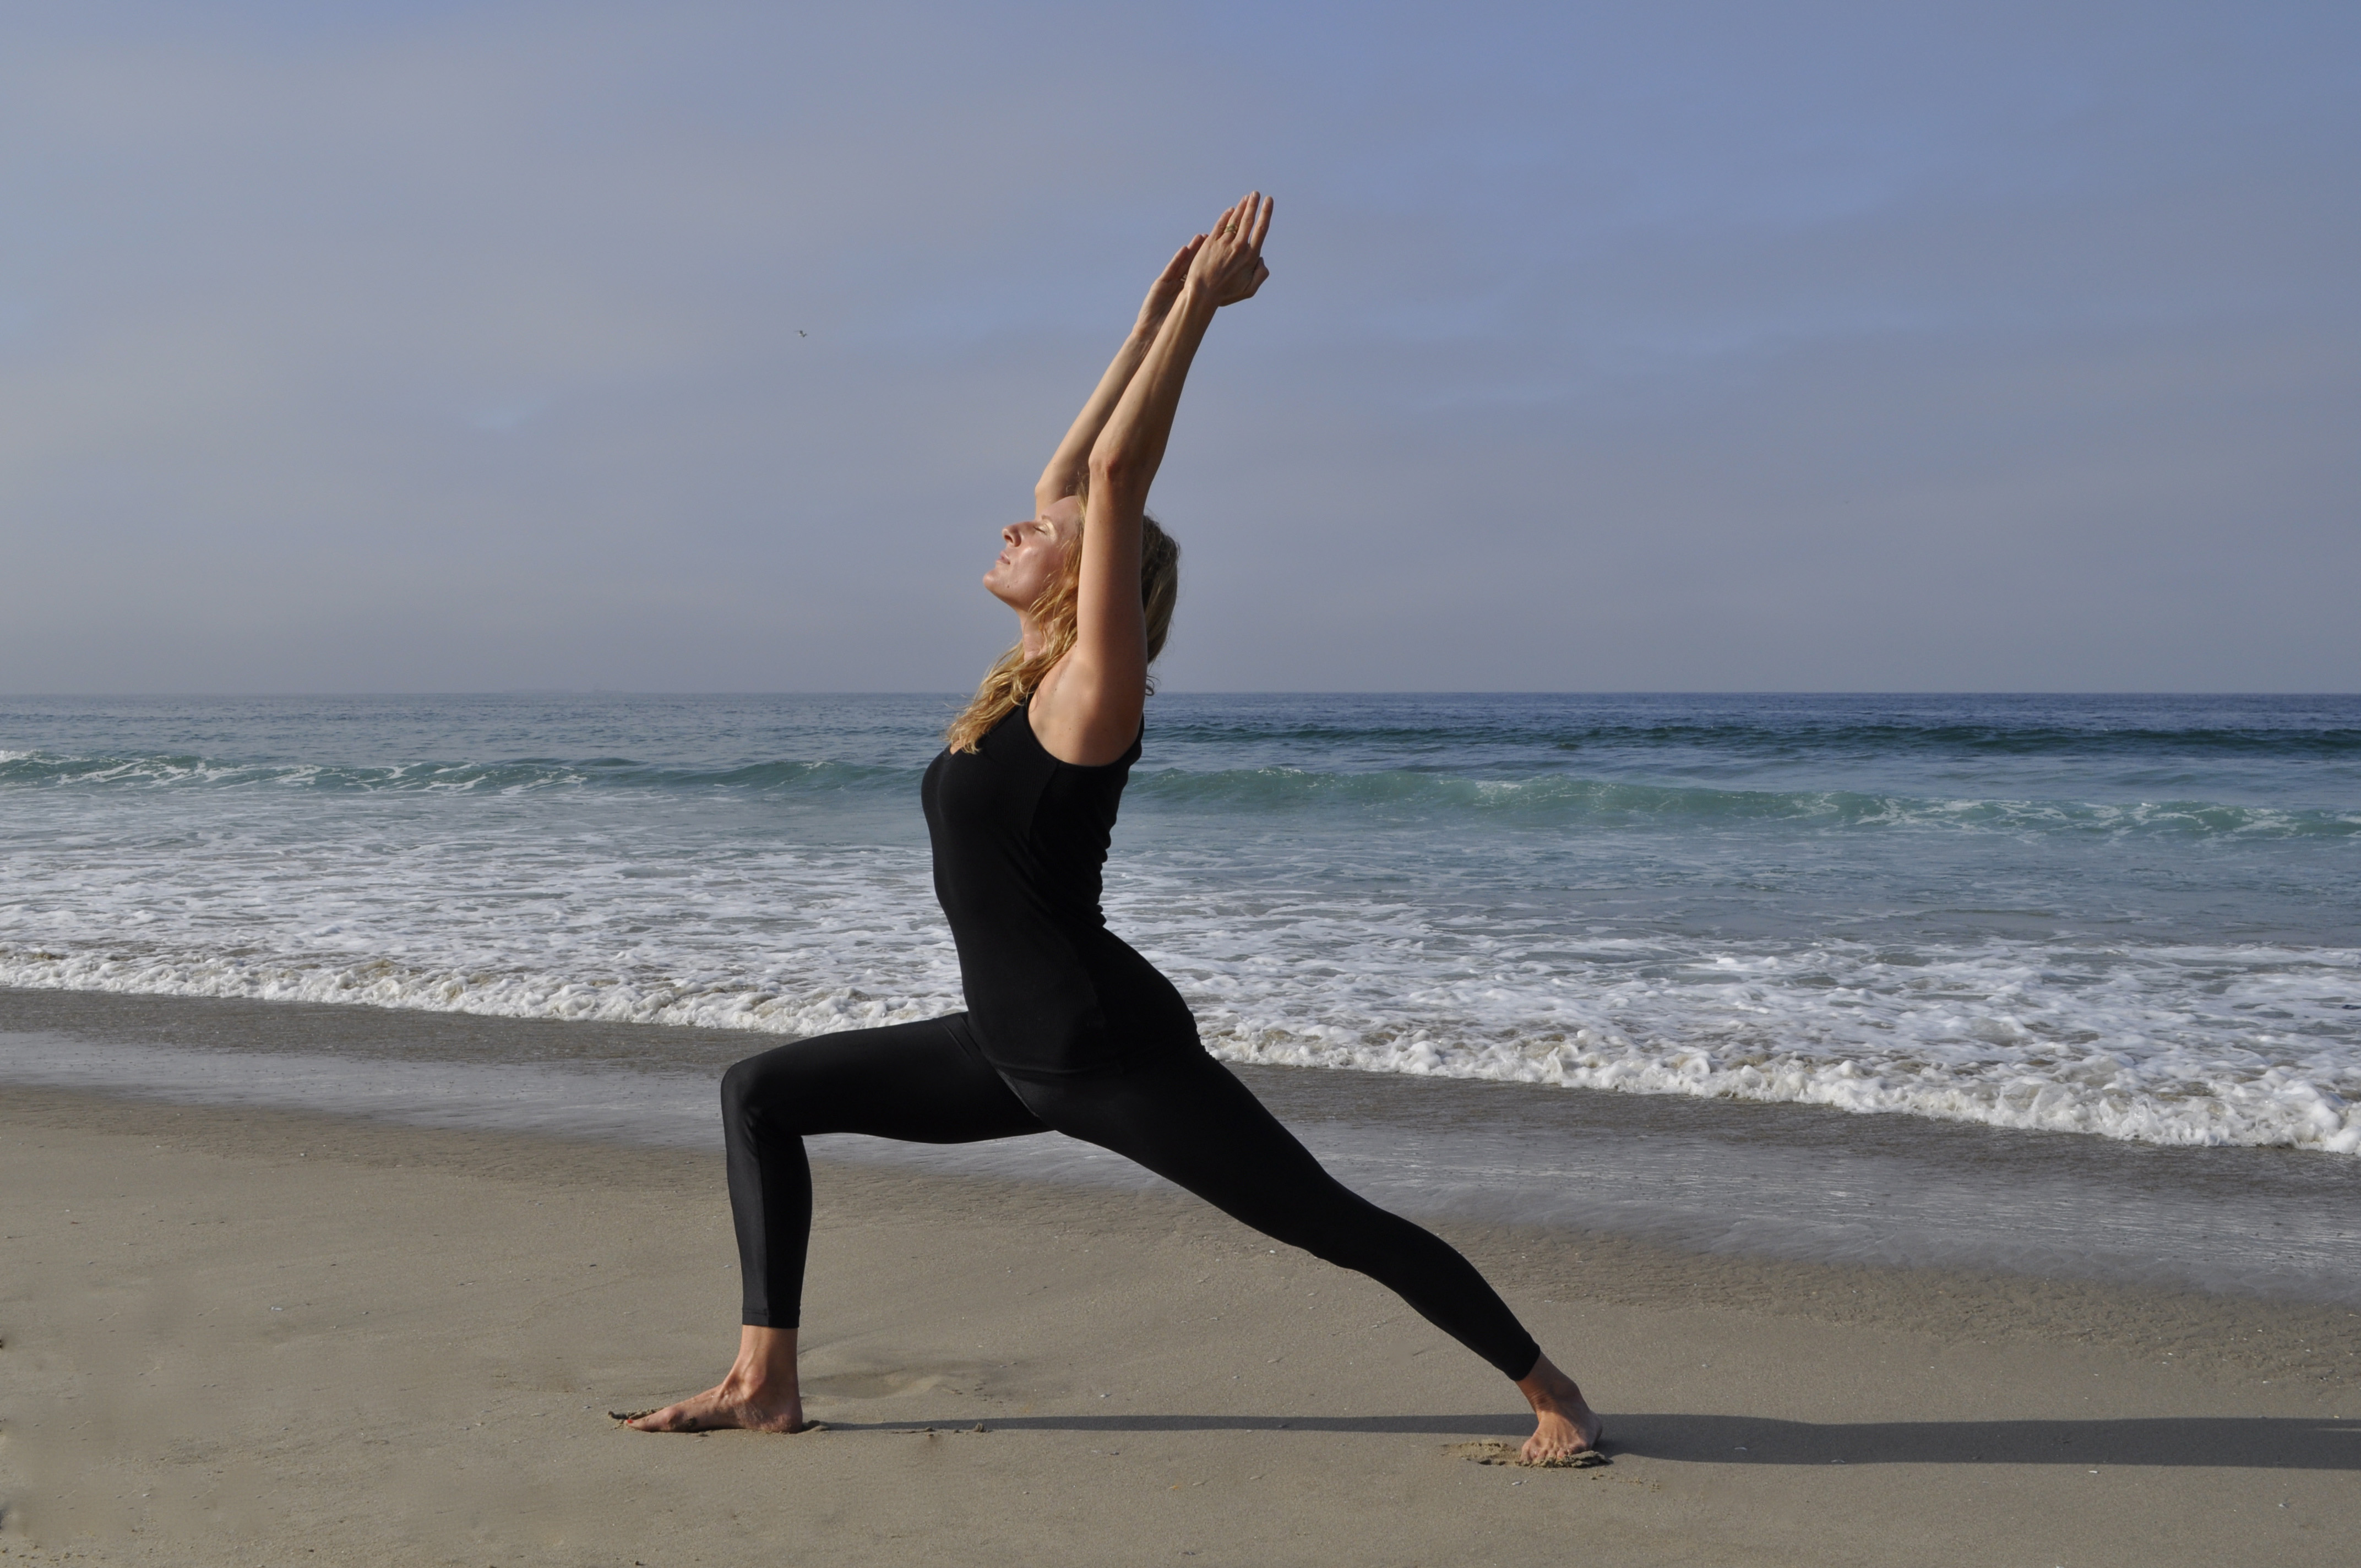 5 Gentle (and Highly Beneficial!) Yoga Poses to do Every Day